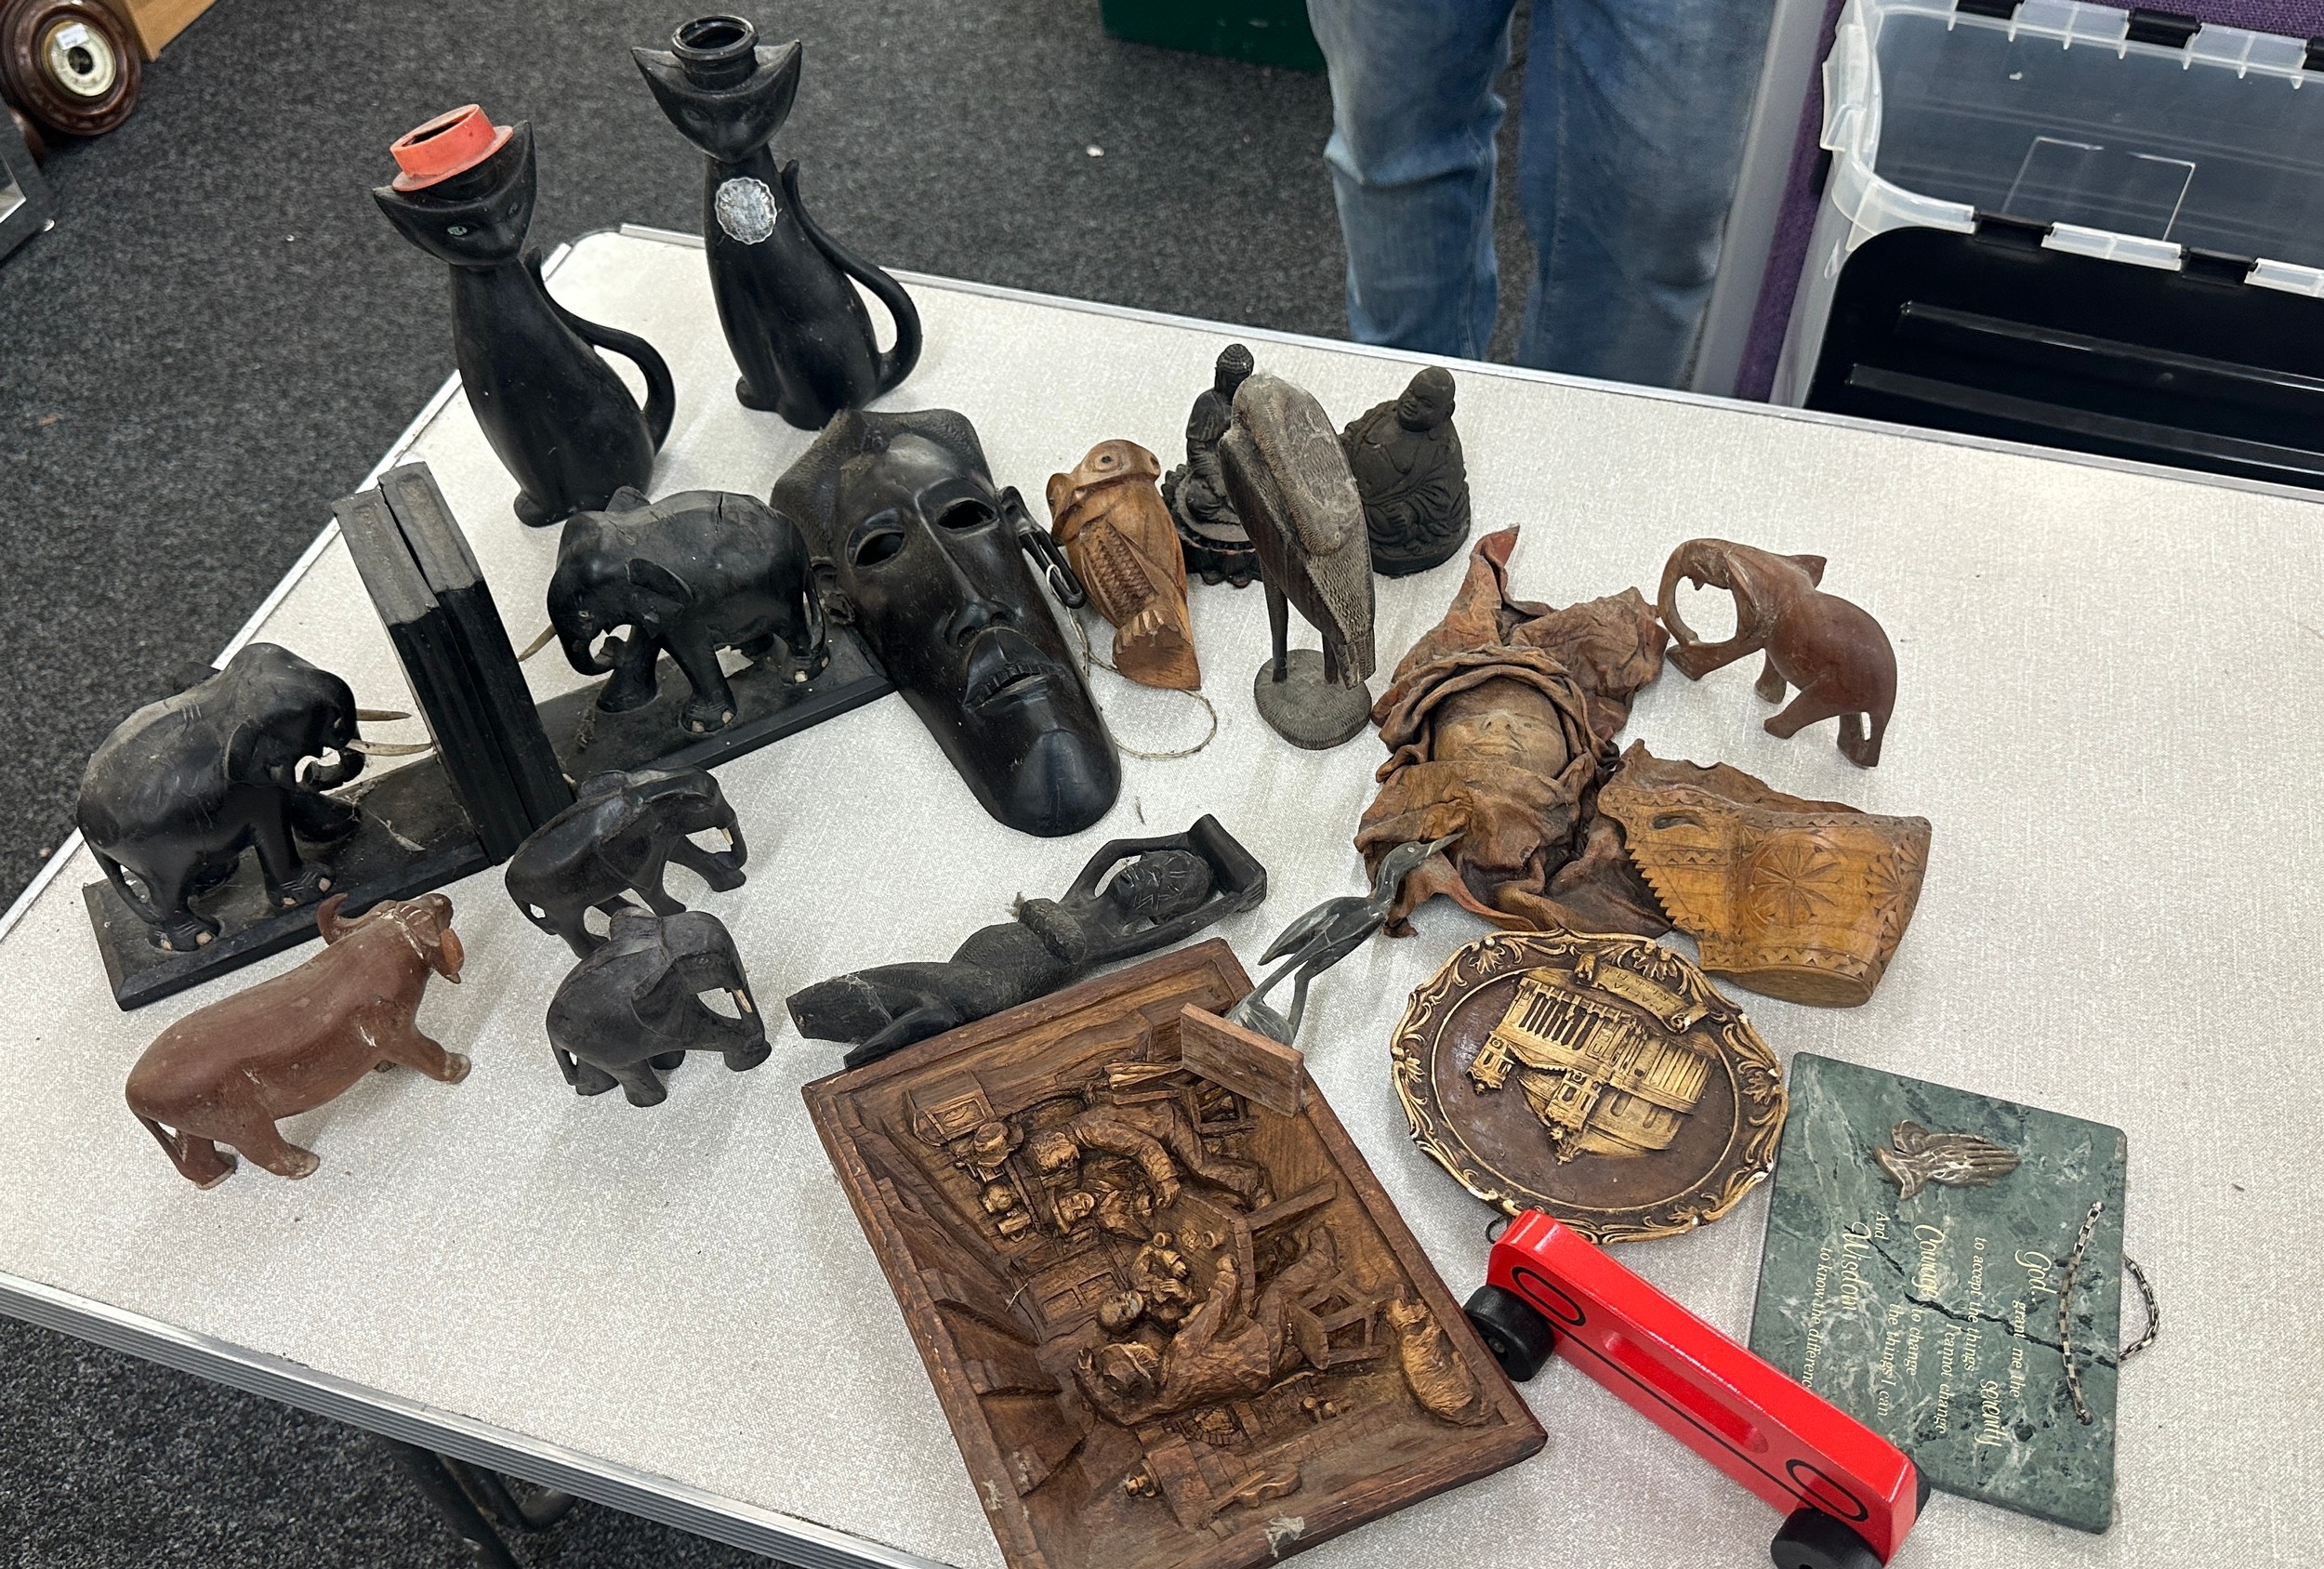 Selection of carved wooden items